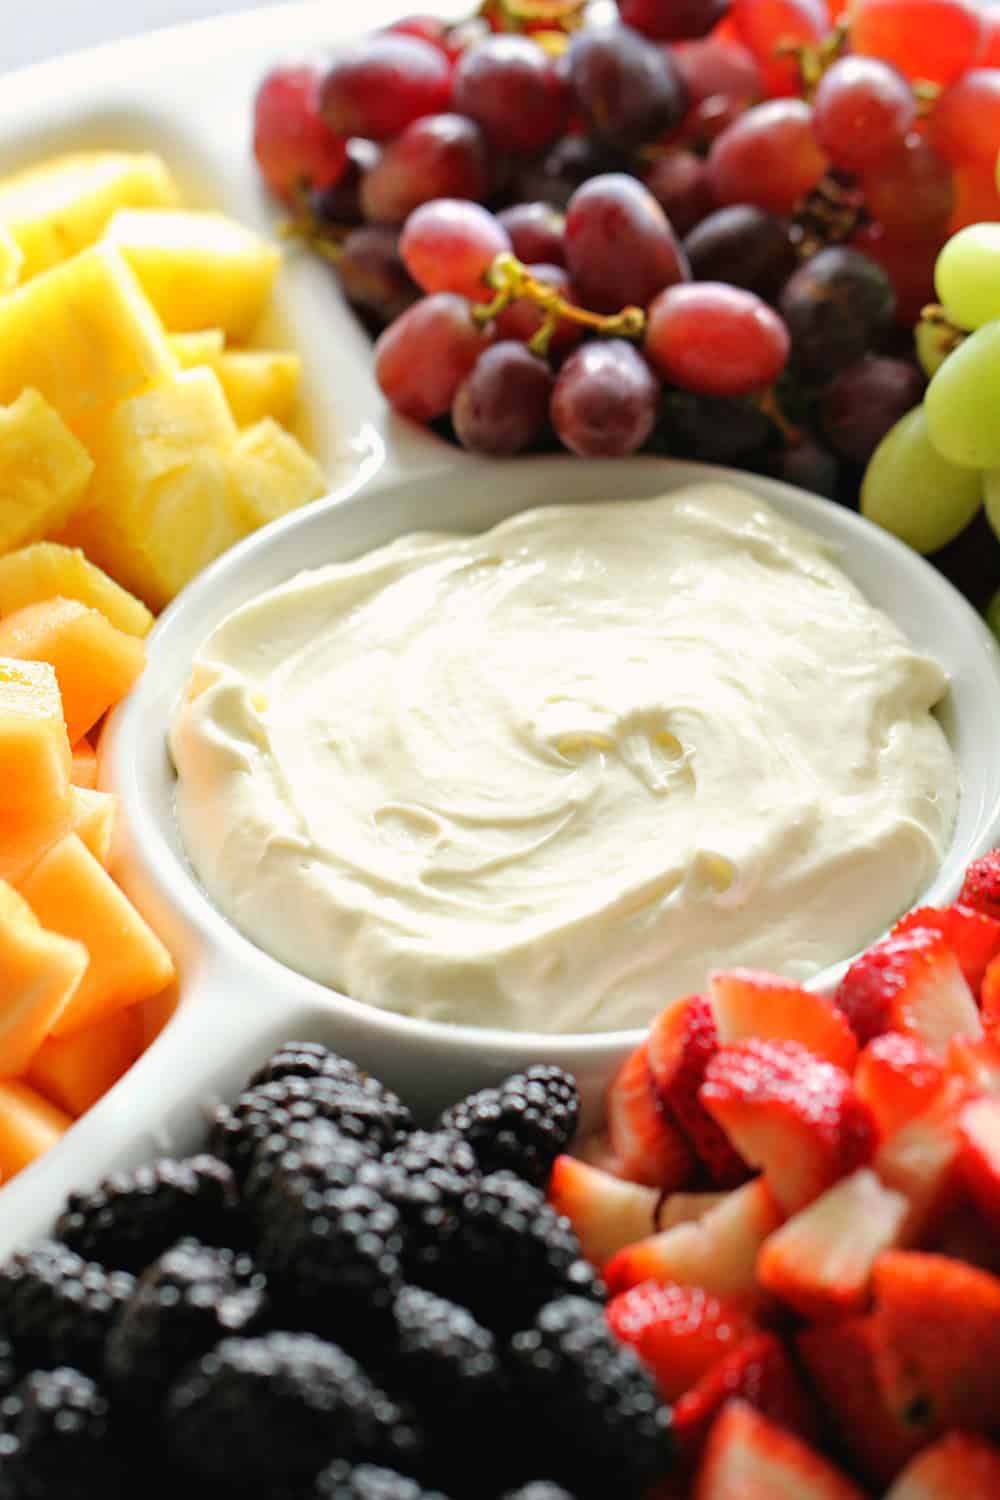 https://www.sixsistersstuff.com/wp-content/uploads/2011/04/Easy-Marshmallow-Cream-Cheese-Fruit-Dip-on-SixSistersStuff1.jpg